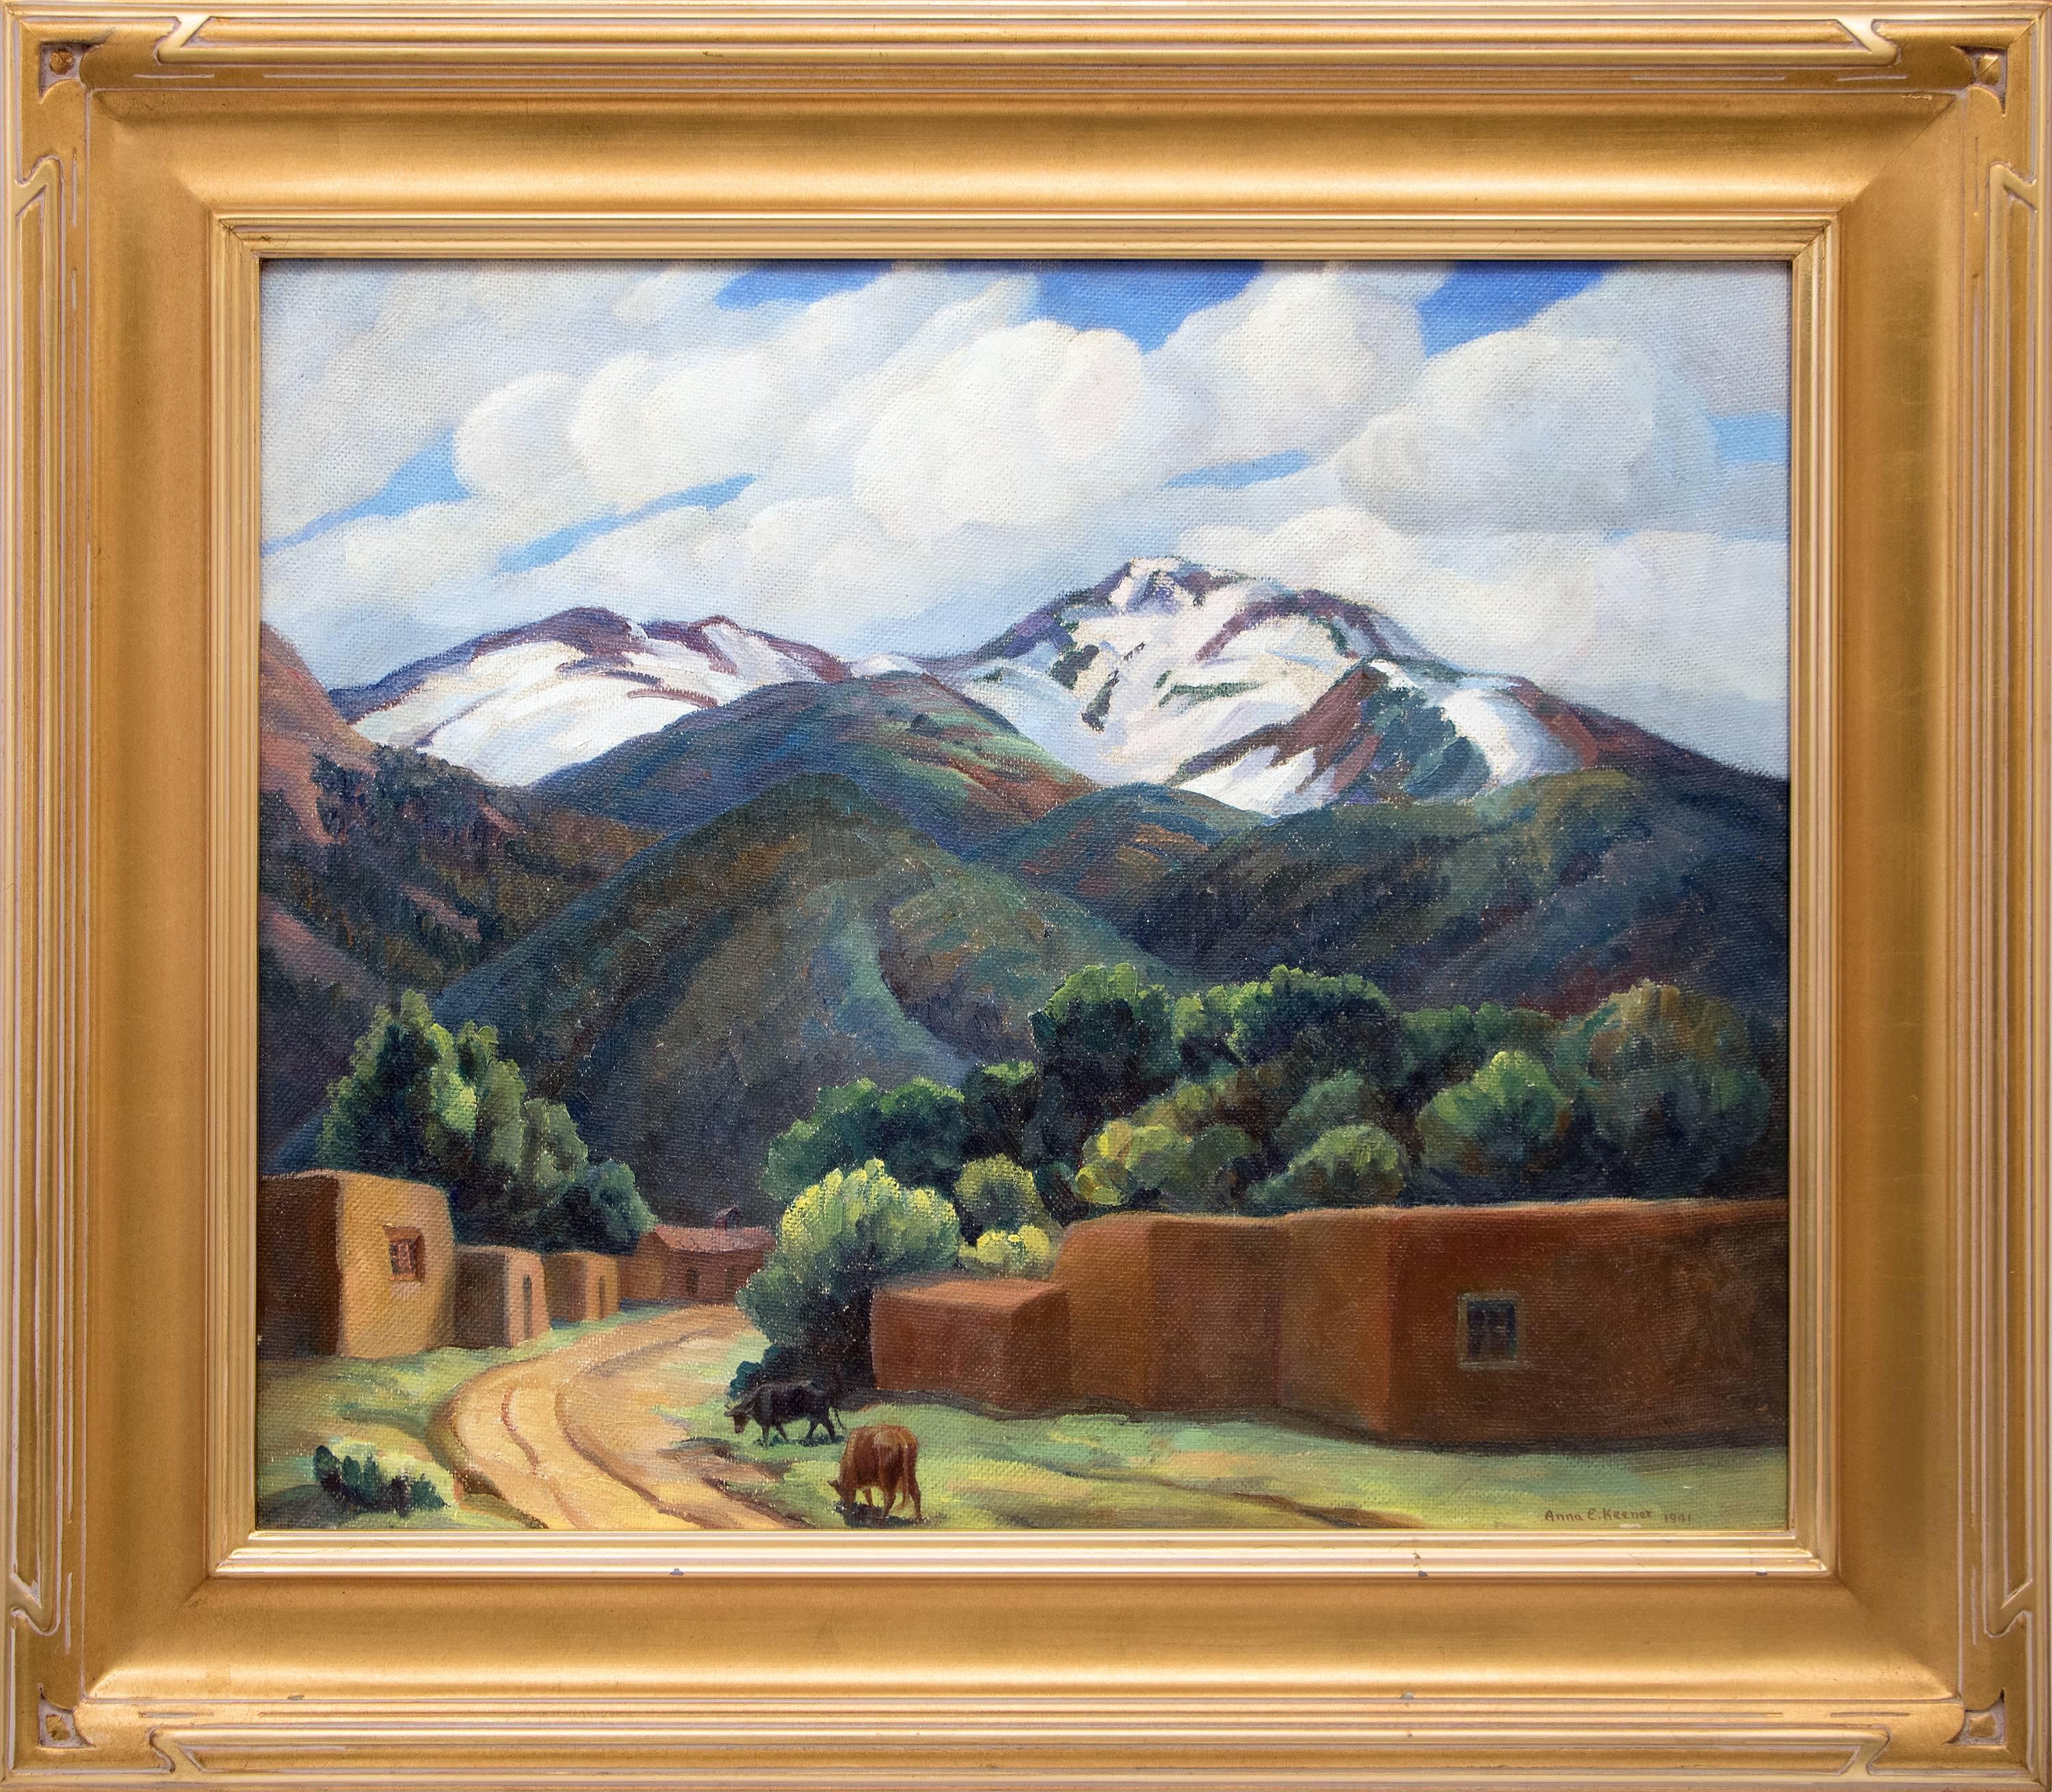 Anna Keener Landscape Painting - Arroyo Seco - Near Taos, New Mexico